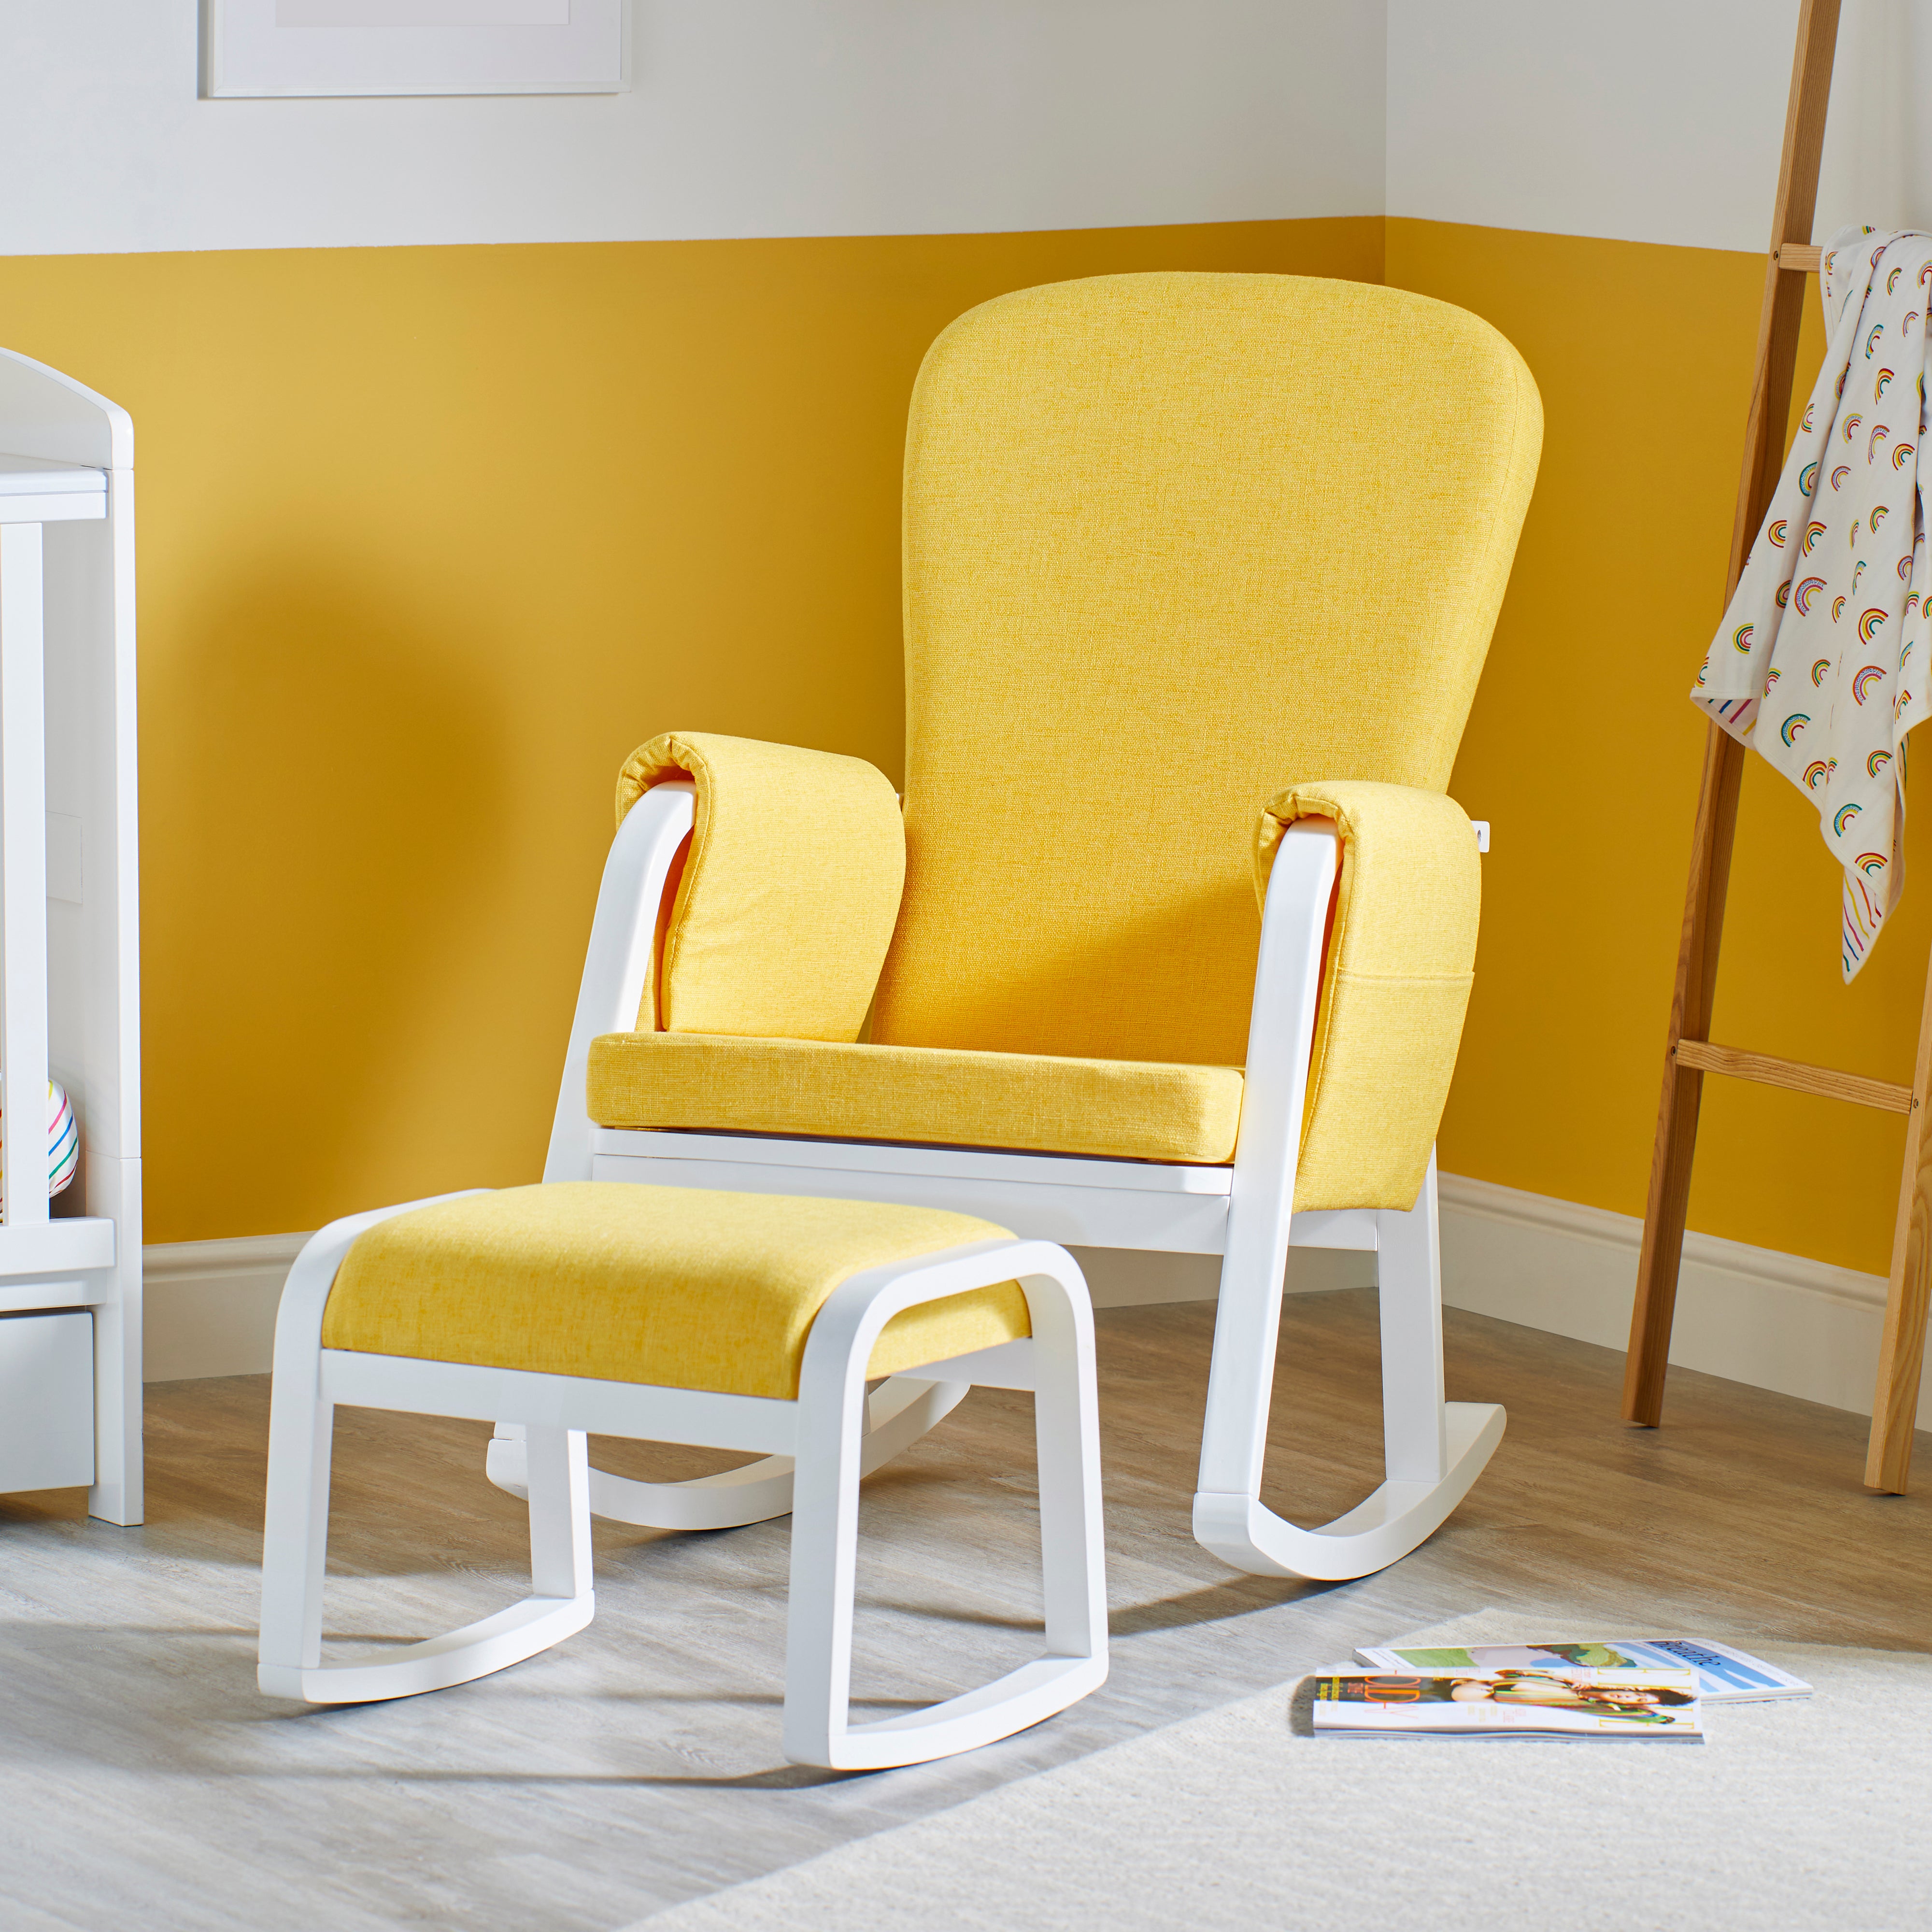 Dursley Rocking Chair and Stool - Clearance